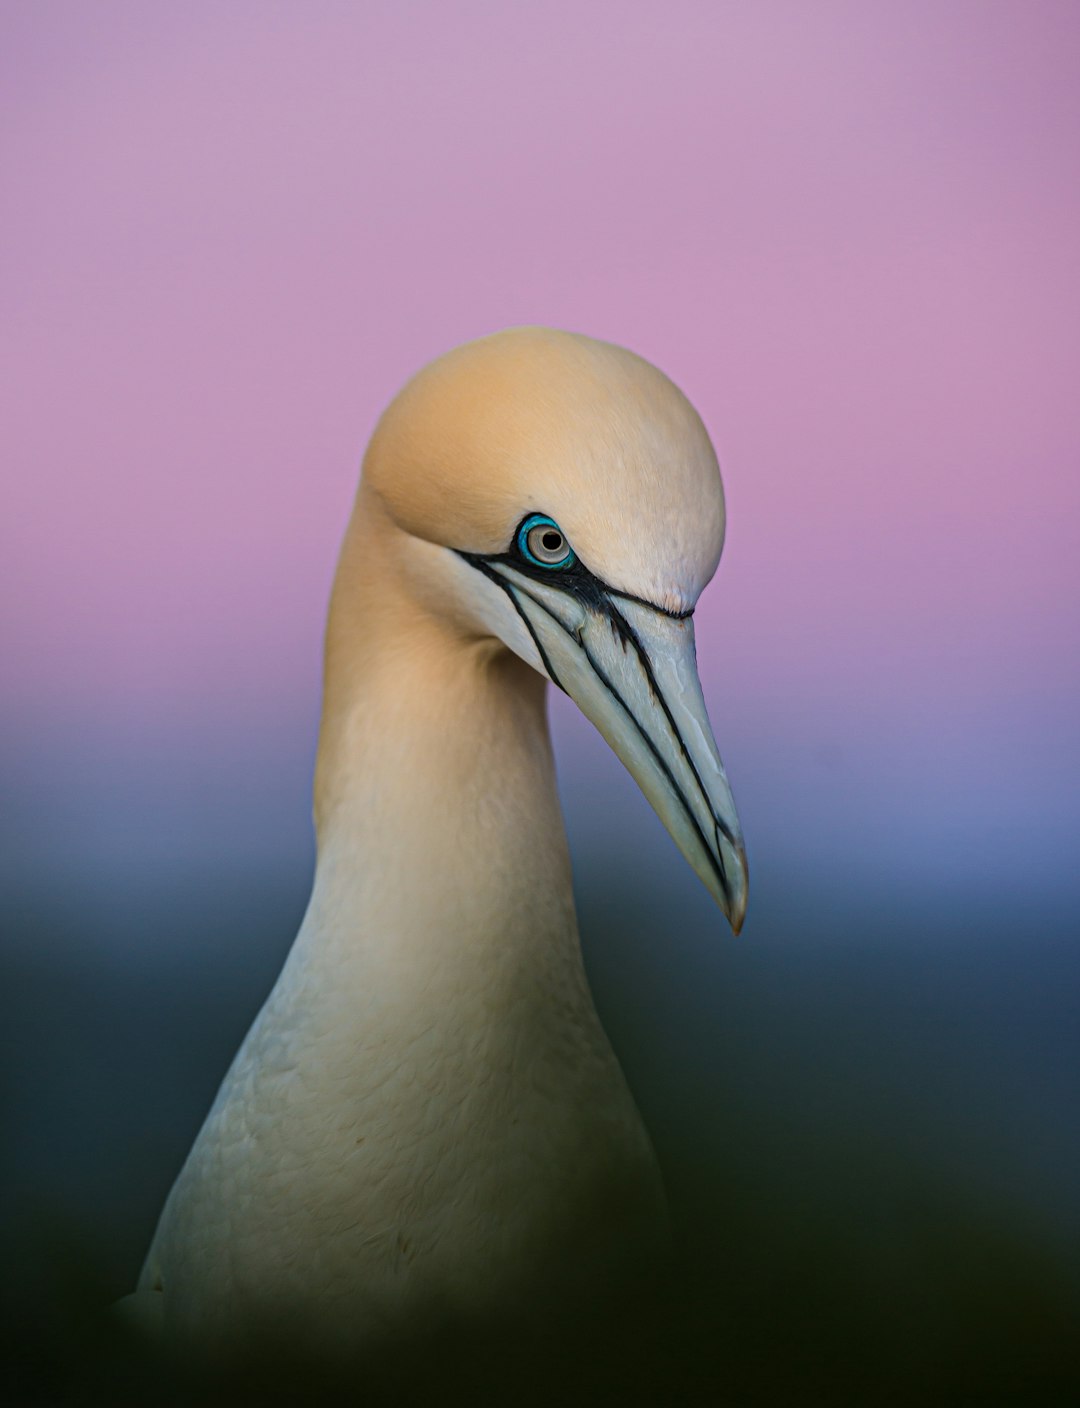 Gannet with an intense view with pink morning sky in the background